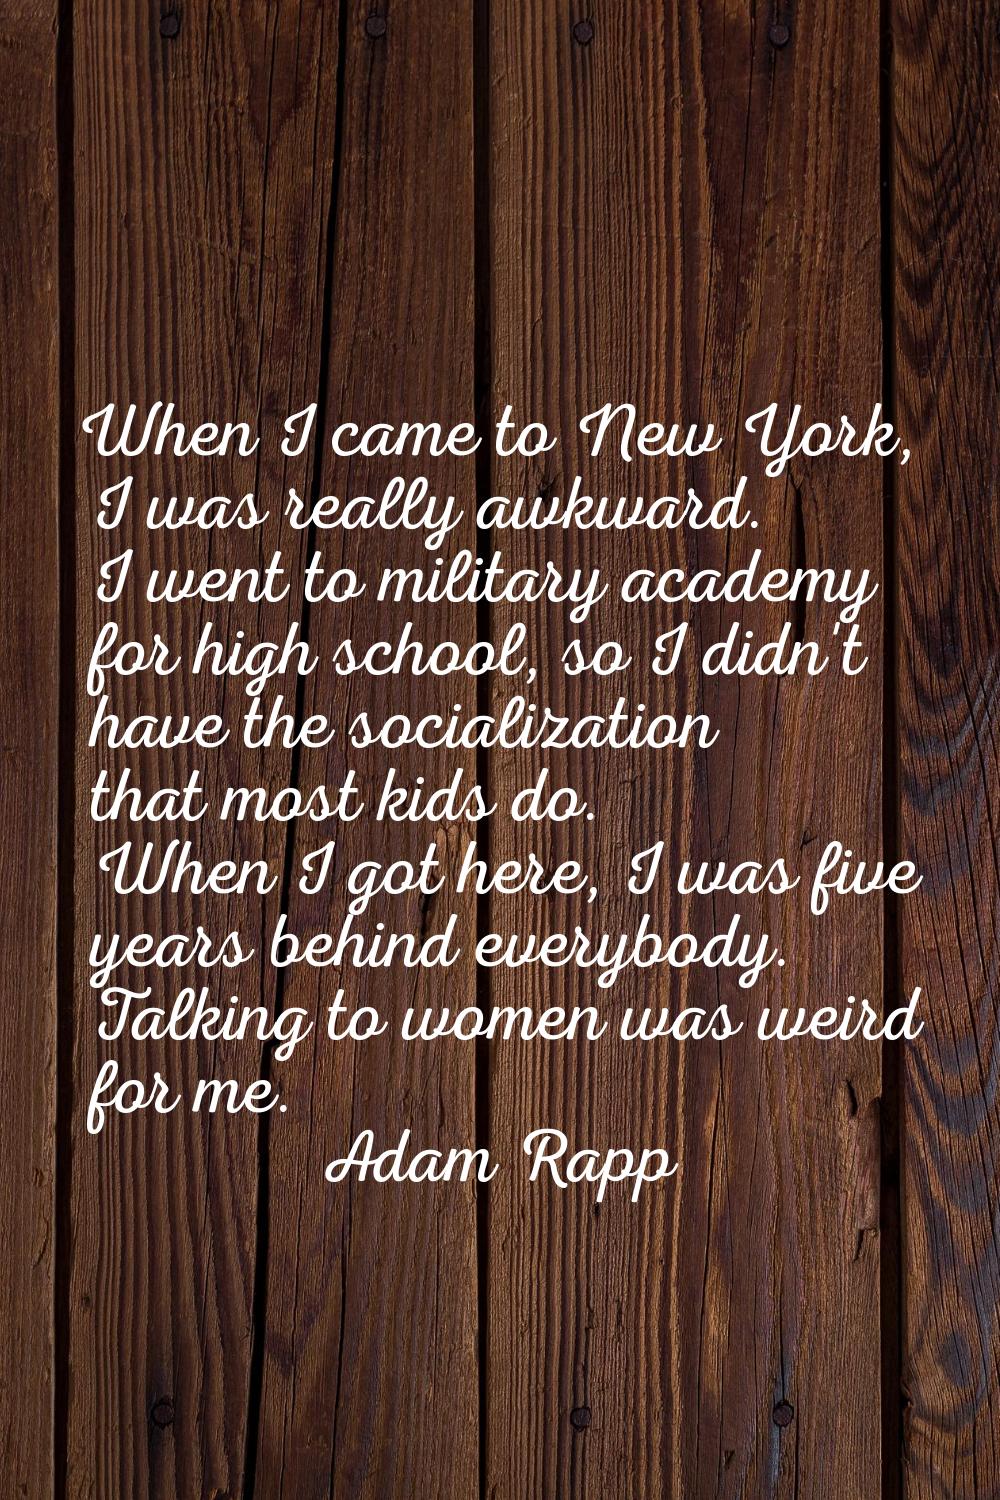 When I came to New York, I was really awkward. I went to military academy for high school, so I did